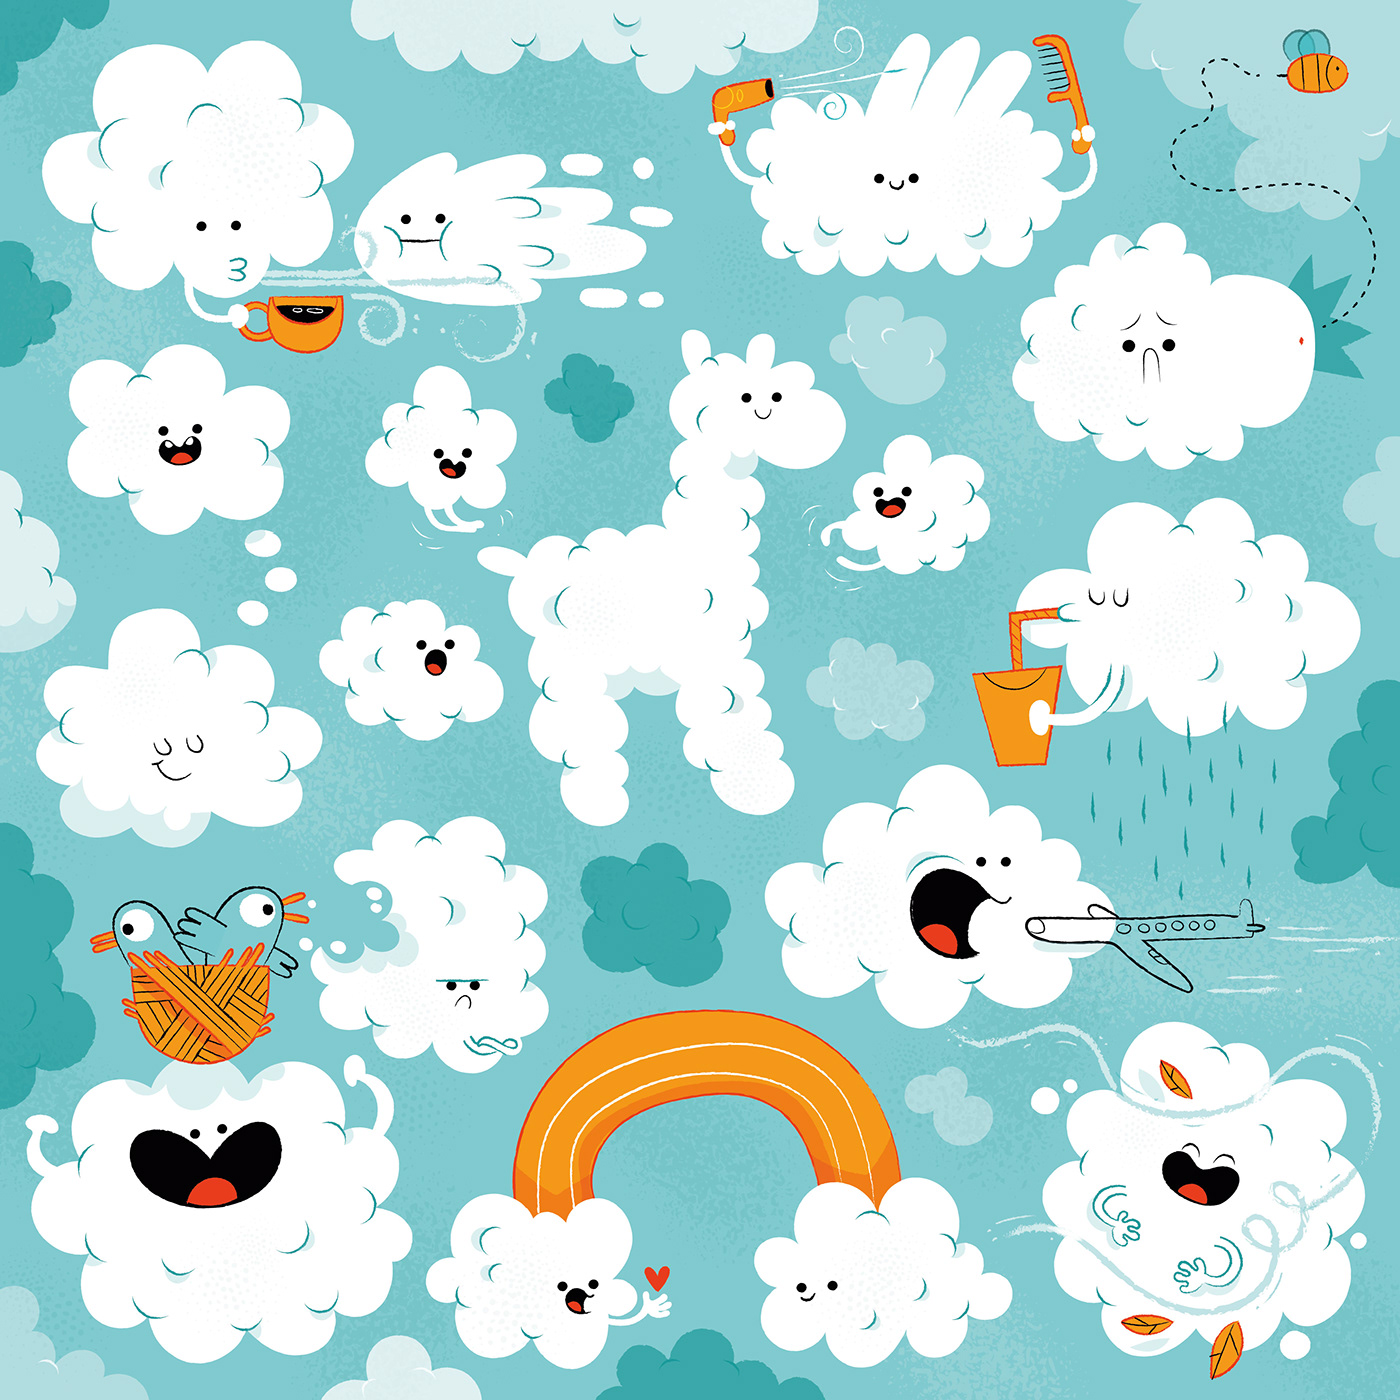 characters children's book children's illustration clouds ILLUSTRATION  memory cards puzzle SKY toy vectorial illustration